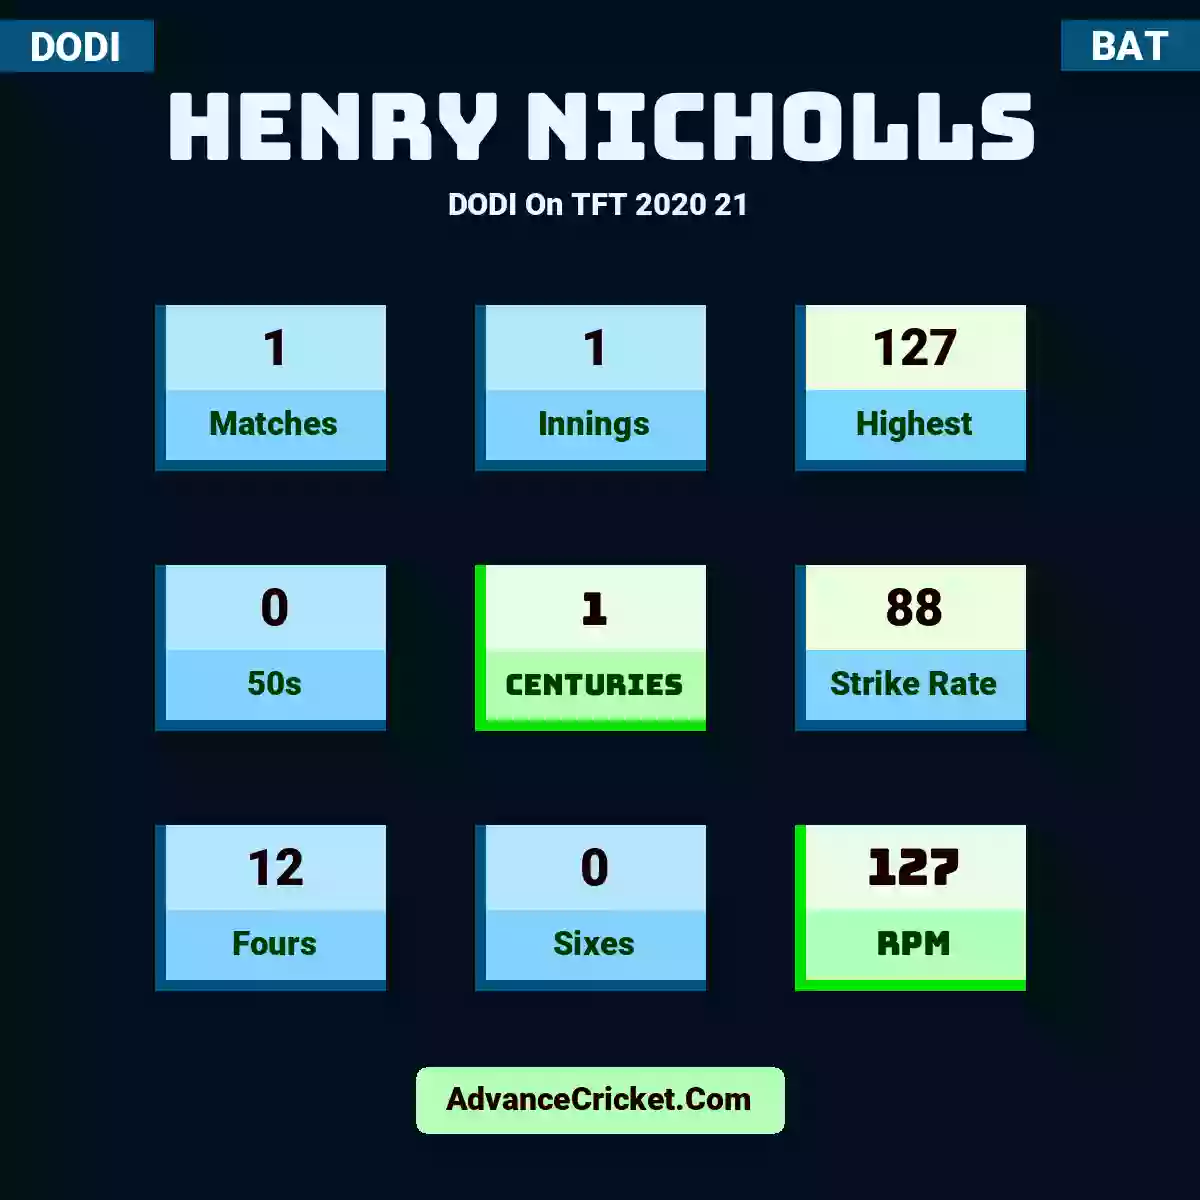 Henry Nicholls DODI  On TFT 2020 21, Henry Nicholls played 1 matches, scored 127 runs as highest, 0 half-centuries, and 1 centuries, with a strike rate of 88. H.Nicholls hit 12 fours and 0 sixes, with an RPM of 127.